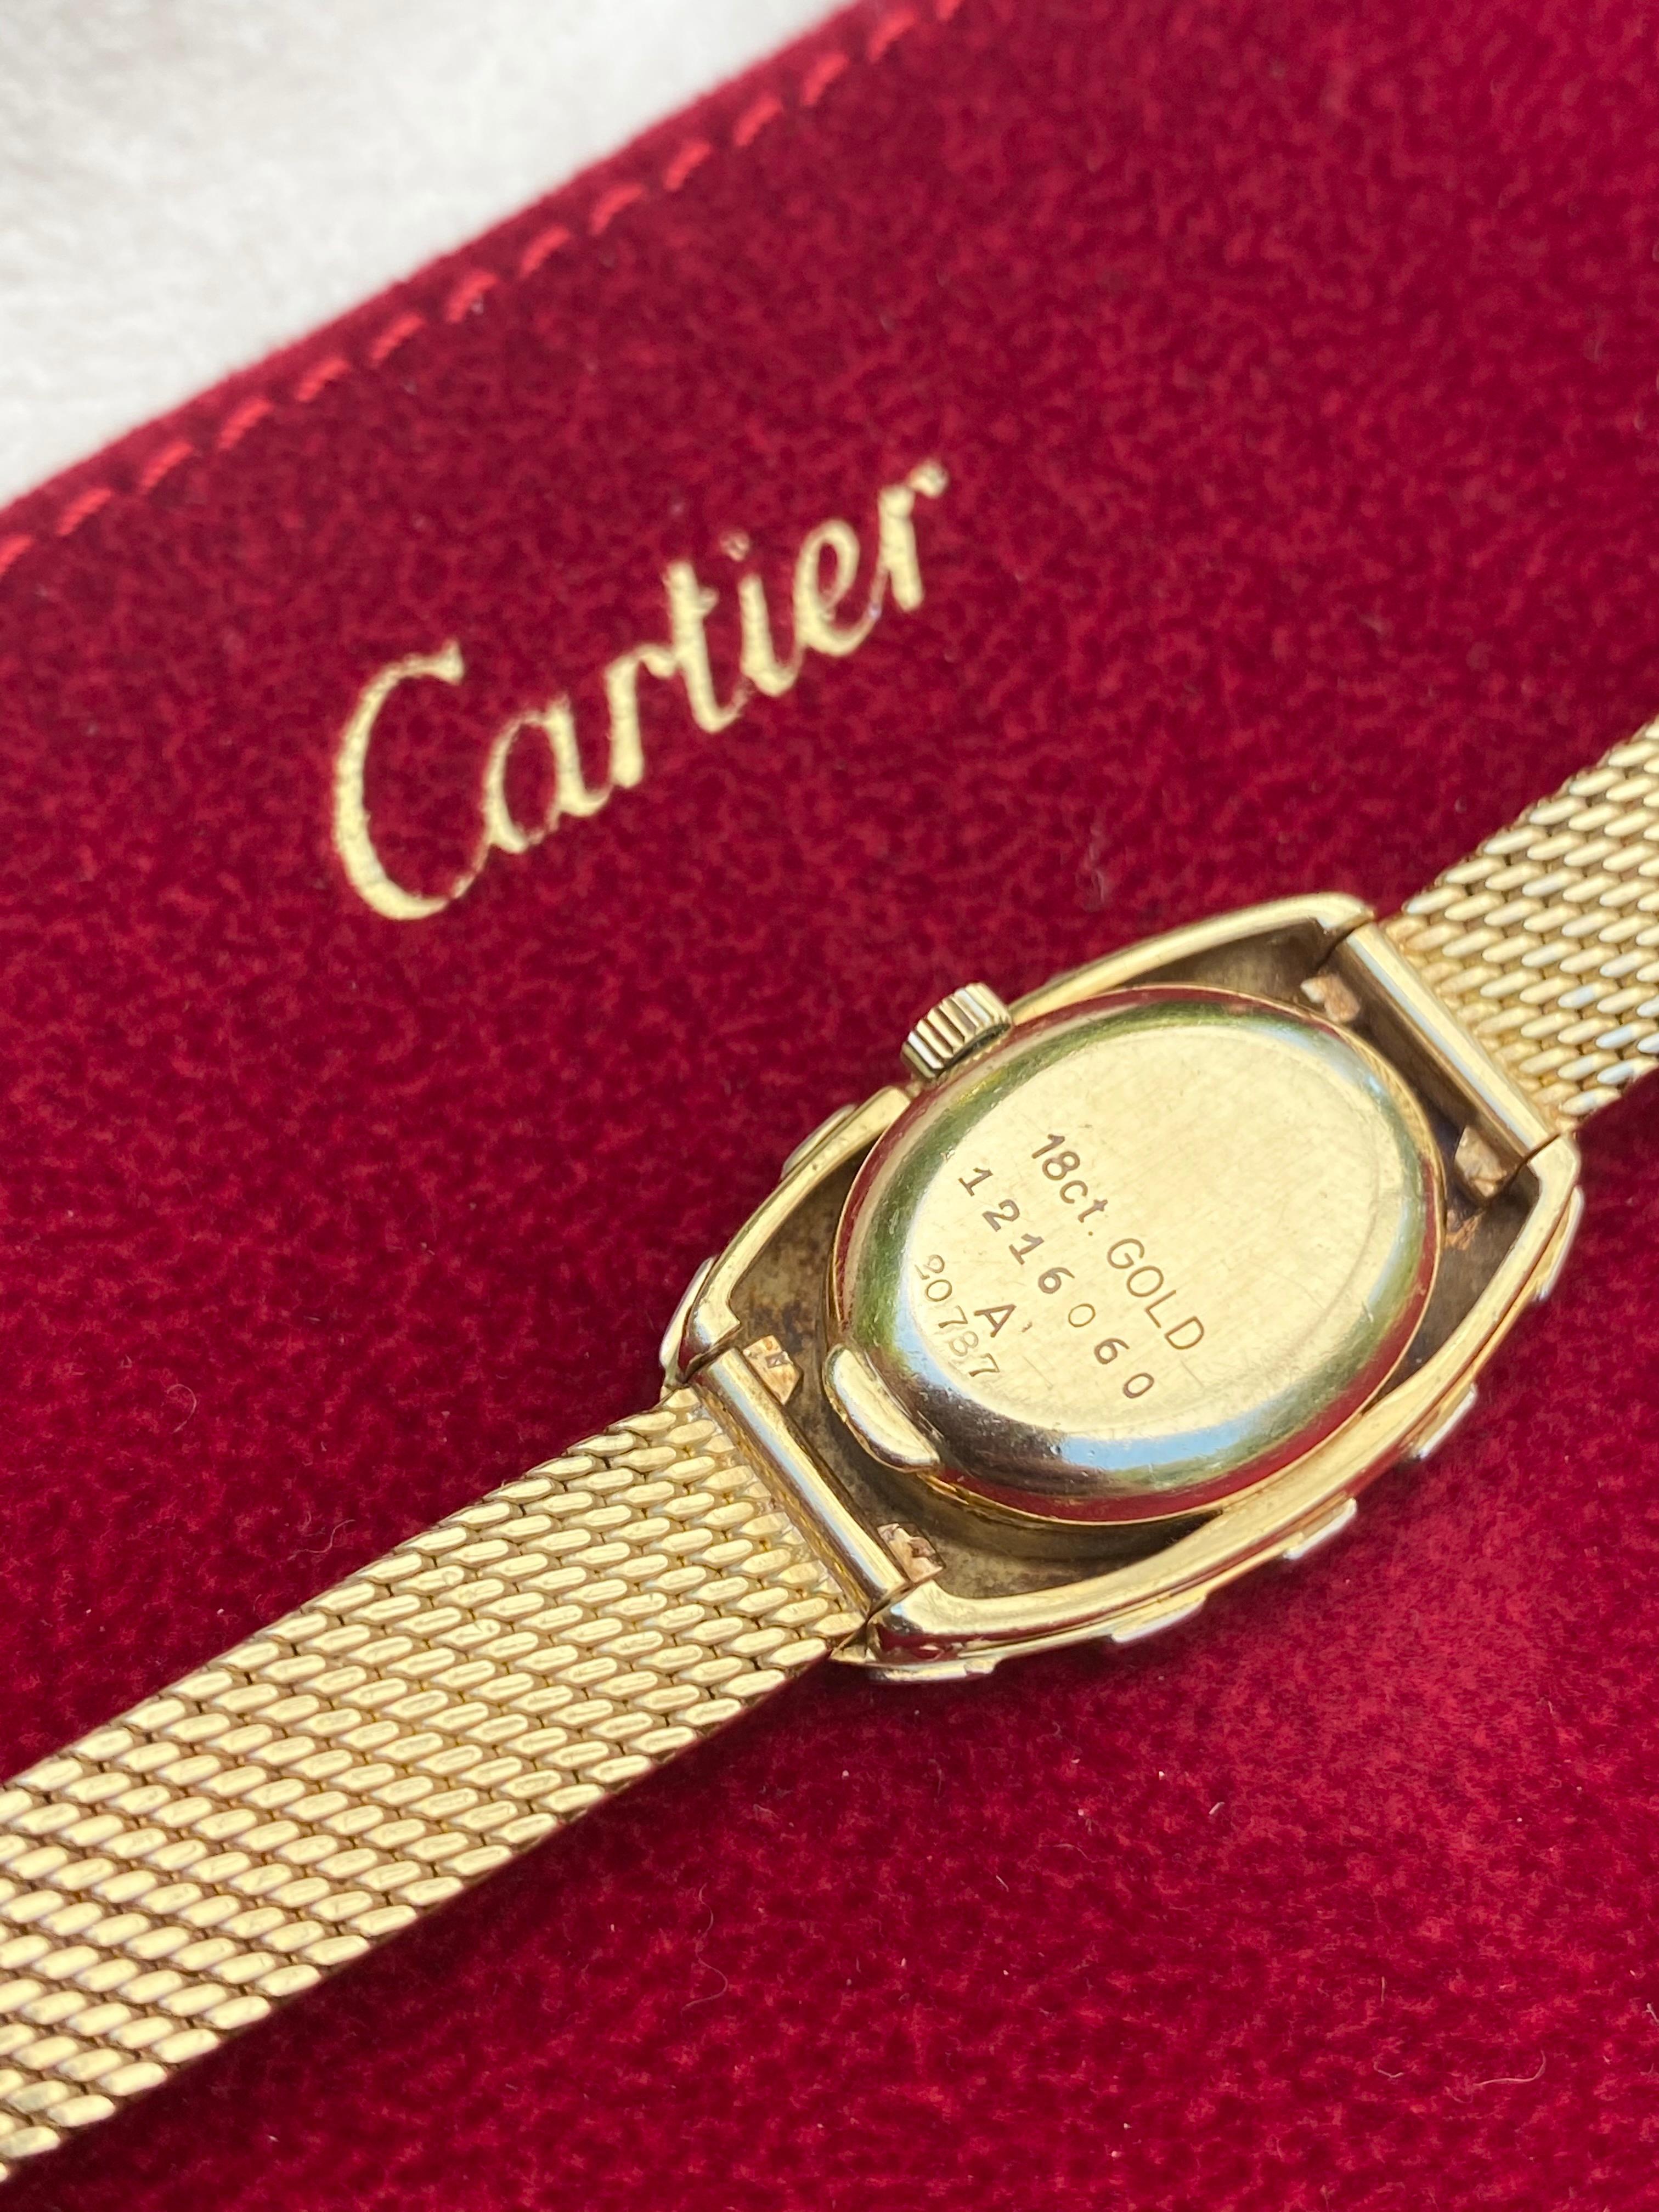 Cartier signed and Jaeger LeCoultre collaboration ladies wristwatch. This one of a kind Cartier timepiece. Complete with all original Cartier parts, Cartier pouch, and its respective papers from the Cartier Salon in Madrid, Spain. 

This piece was